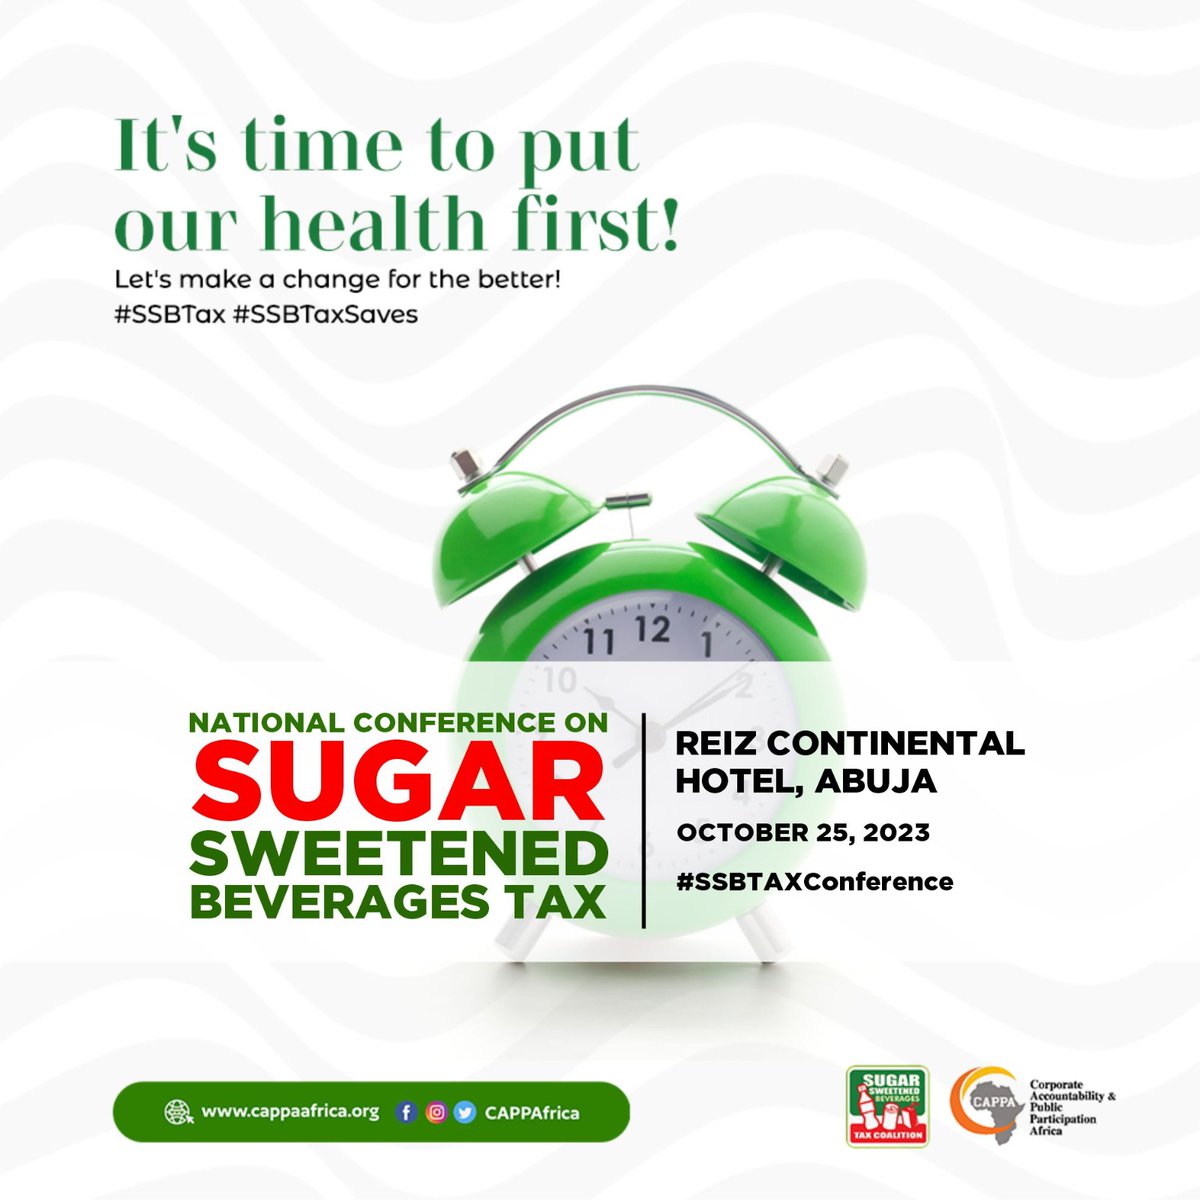 There is no better time than now to put our health first. Say No to Sugary Drinks! Say Yes to #SSBTax!

#SSBTaxConference
@CAPPAfrica